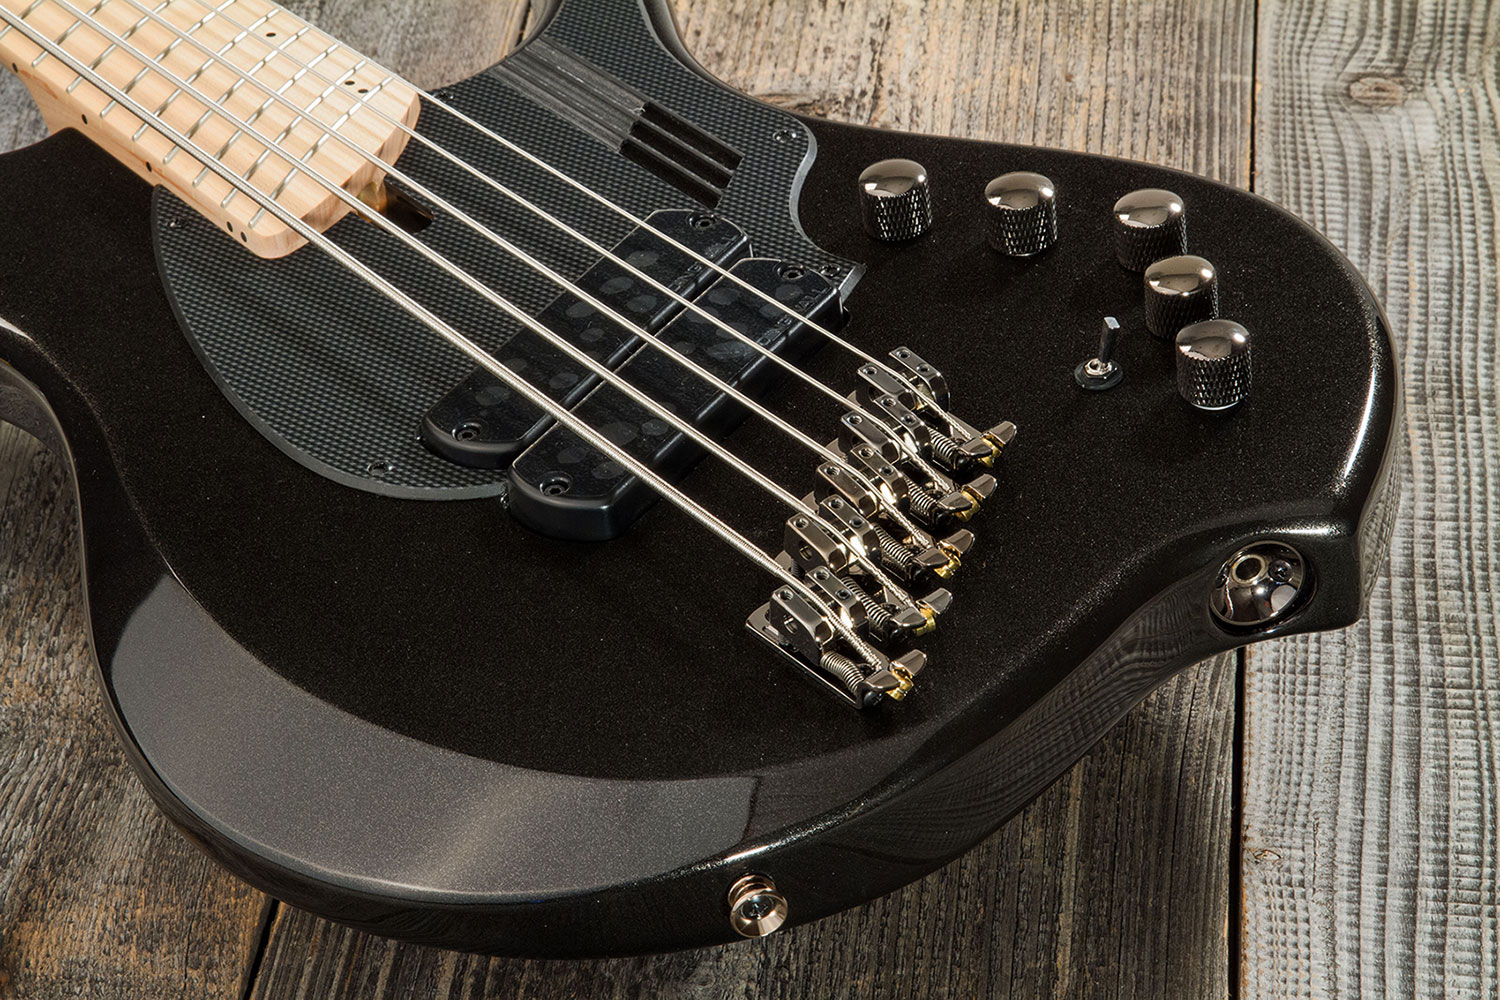 Dingwall Adam Nolly Getgood Ng2 5c Sig Active Mn +housse - Metallic Black - Solid body electric bass - Variation 4